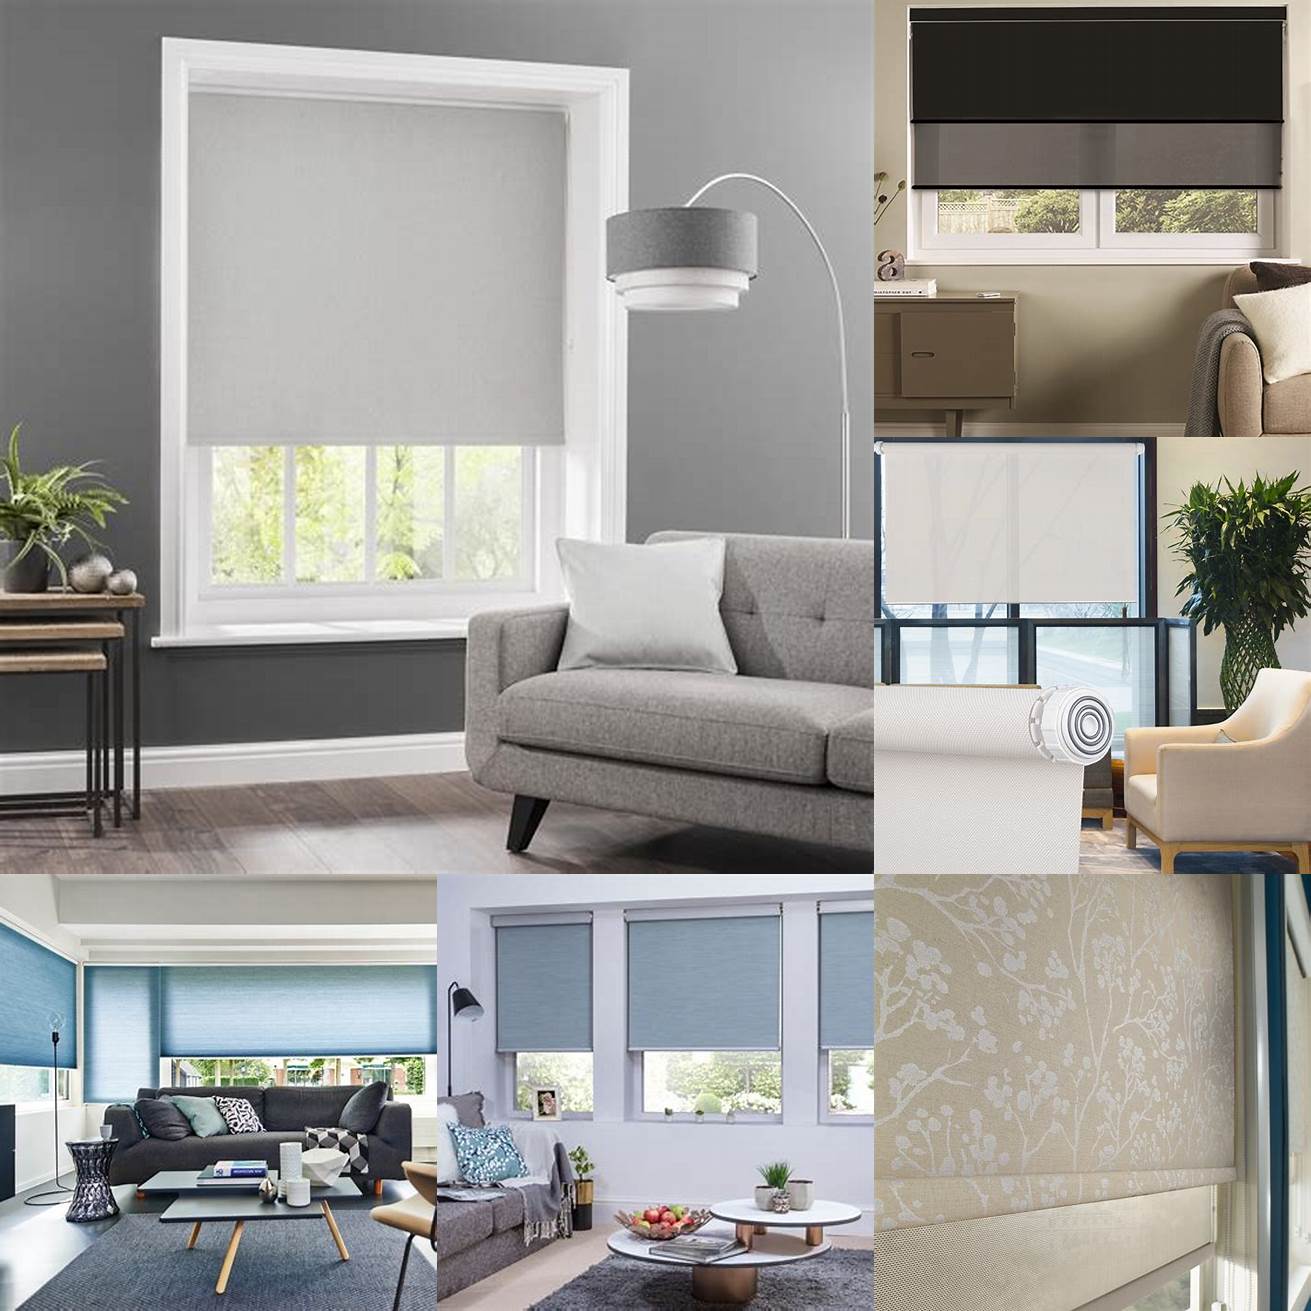 Customizable Roller blinds come in a wide range of materials colors patterns and sizes You can choose the one that complements your interior design style and fits your window dimensions